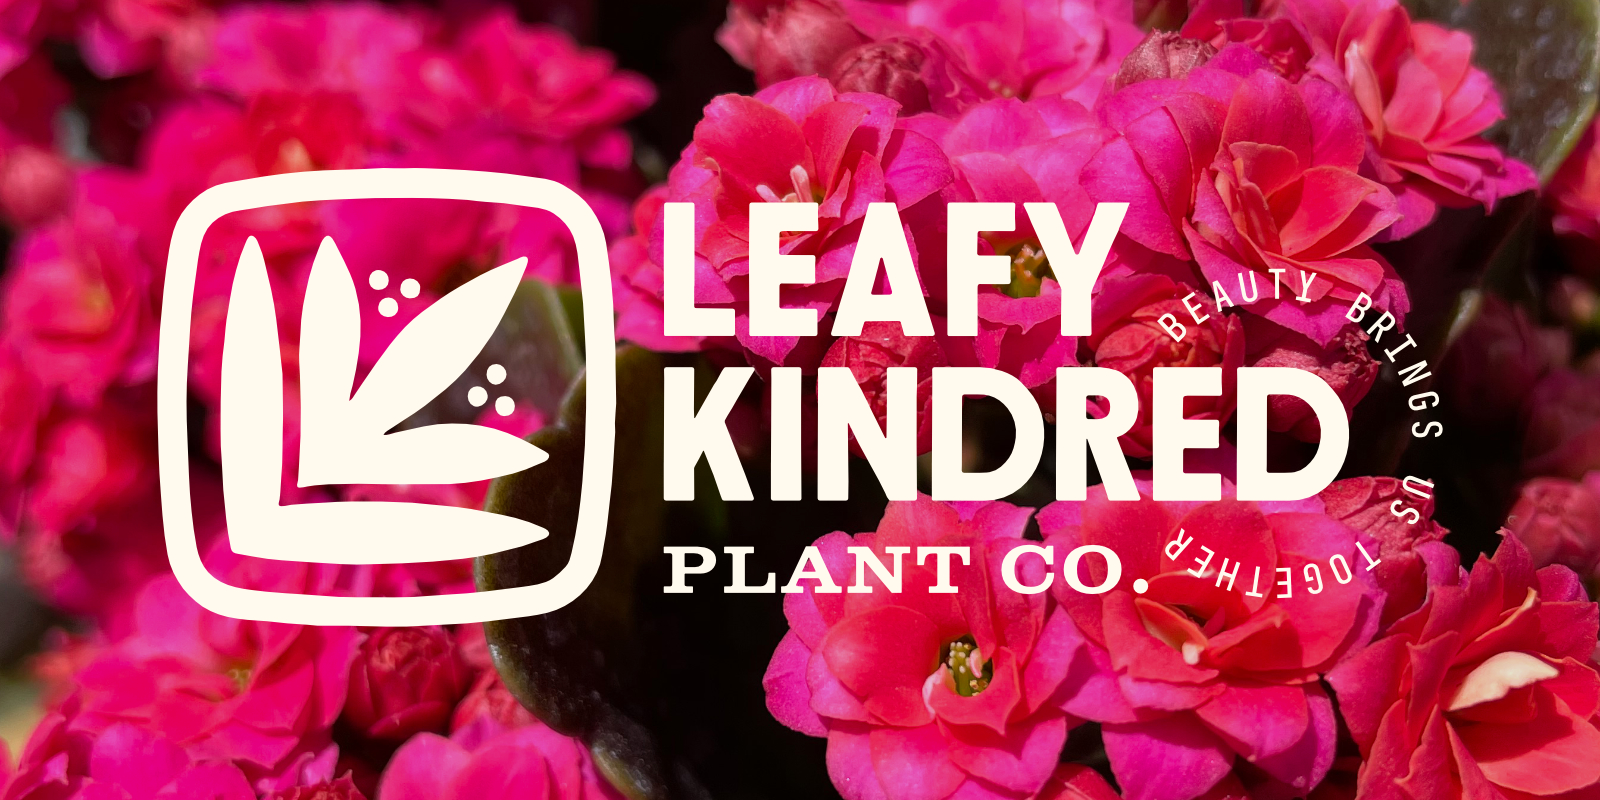 Leafy Kindred Plant Co. Identity